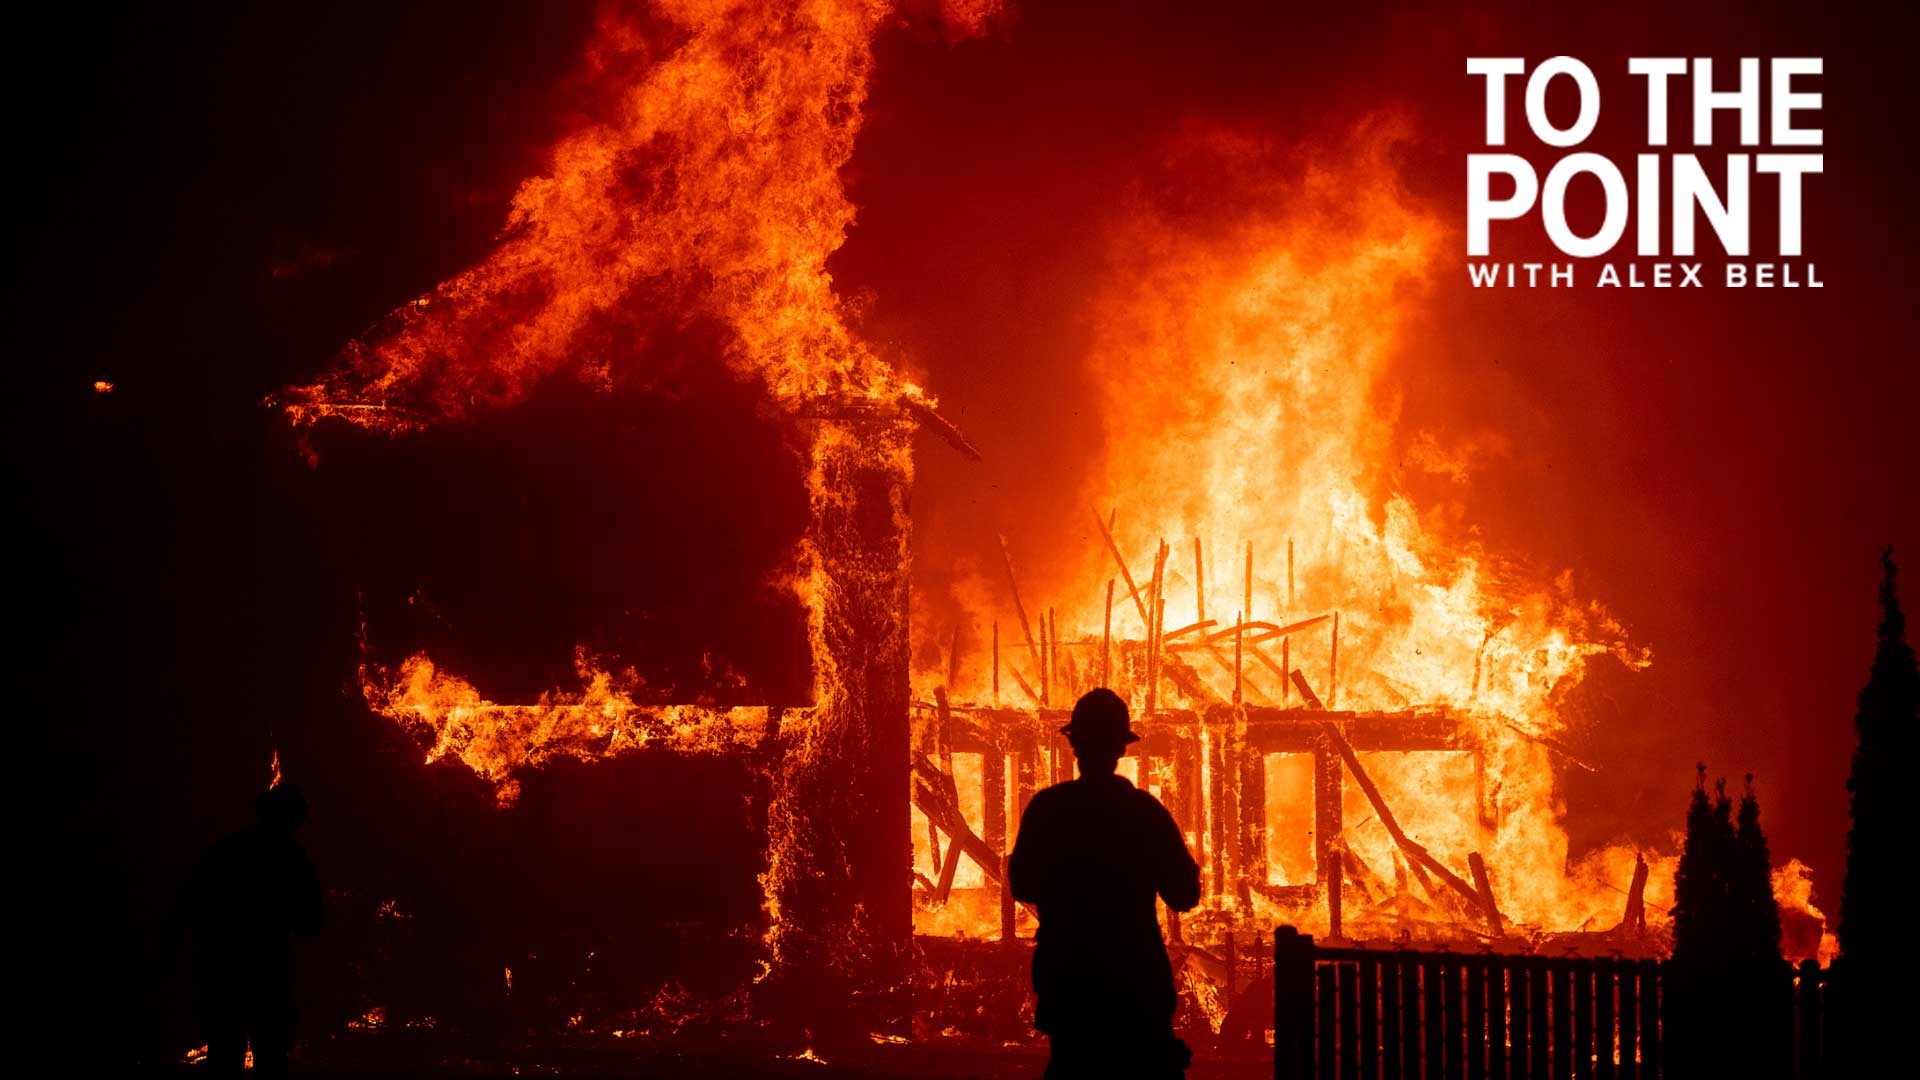 California Fair Plan fire insurance rate to increase | What We Know